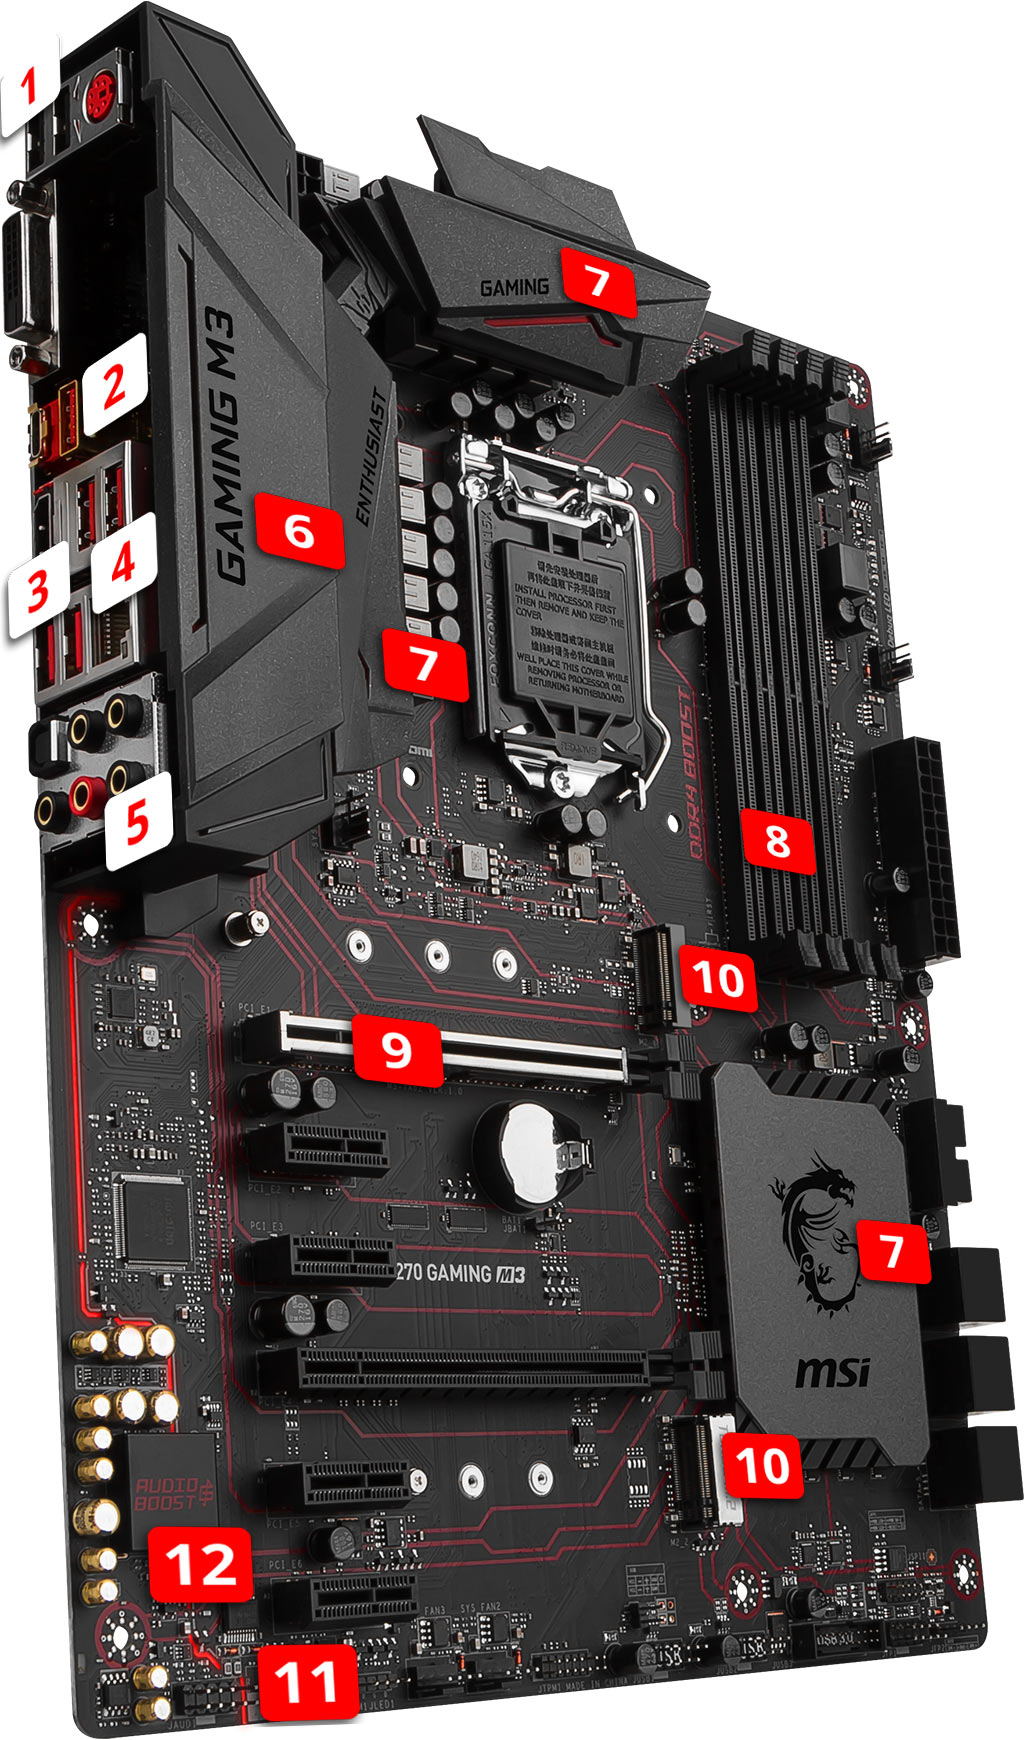 MSI Z270 GAMING M3 overview